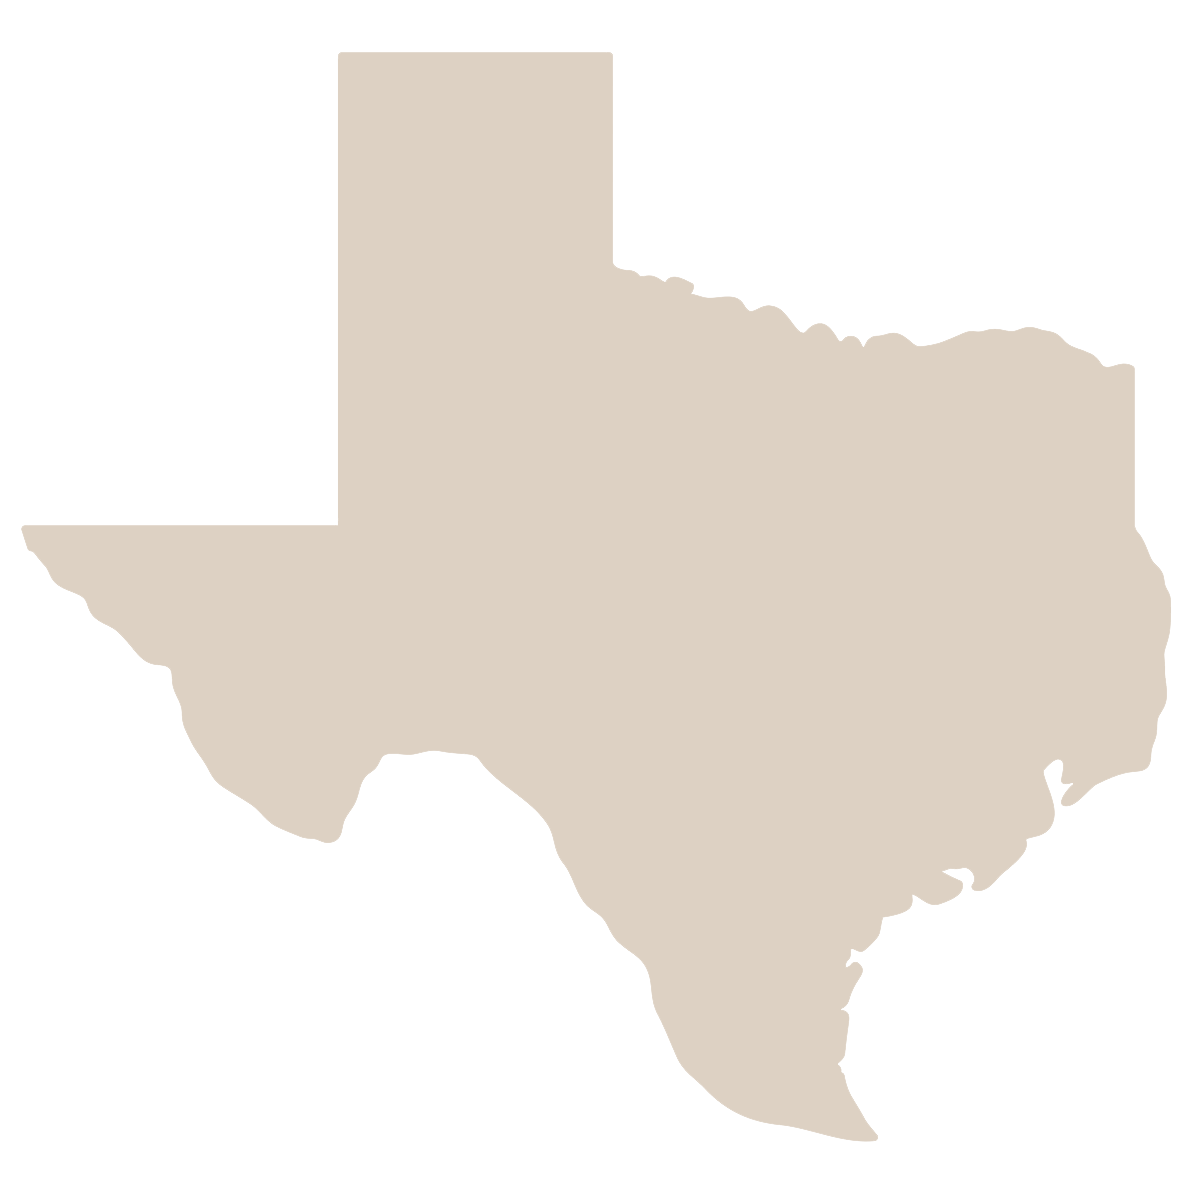 tx Map Highlighted